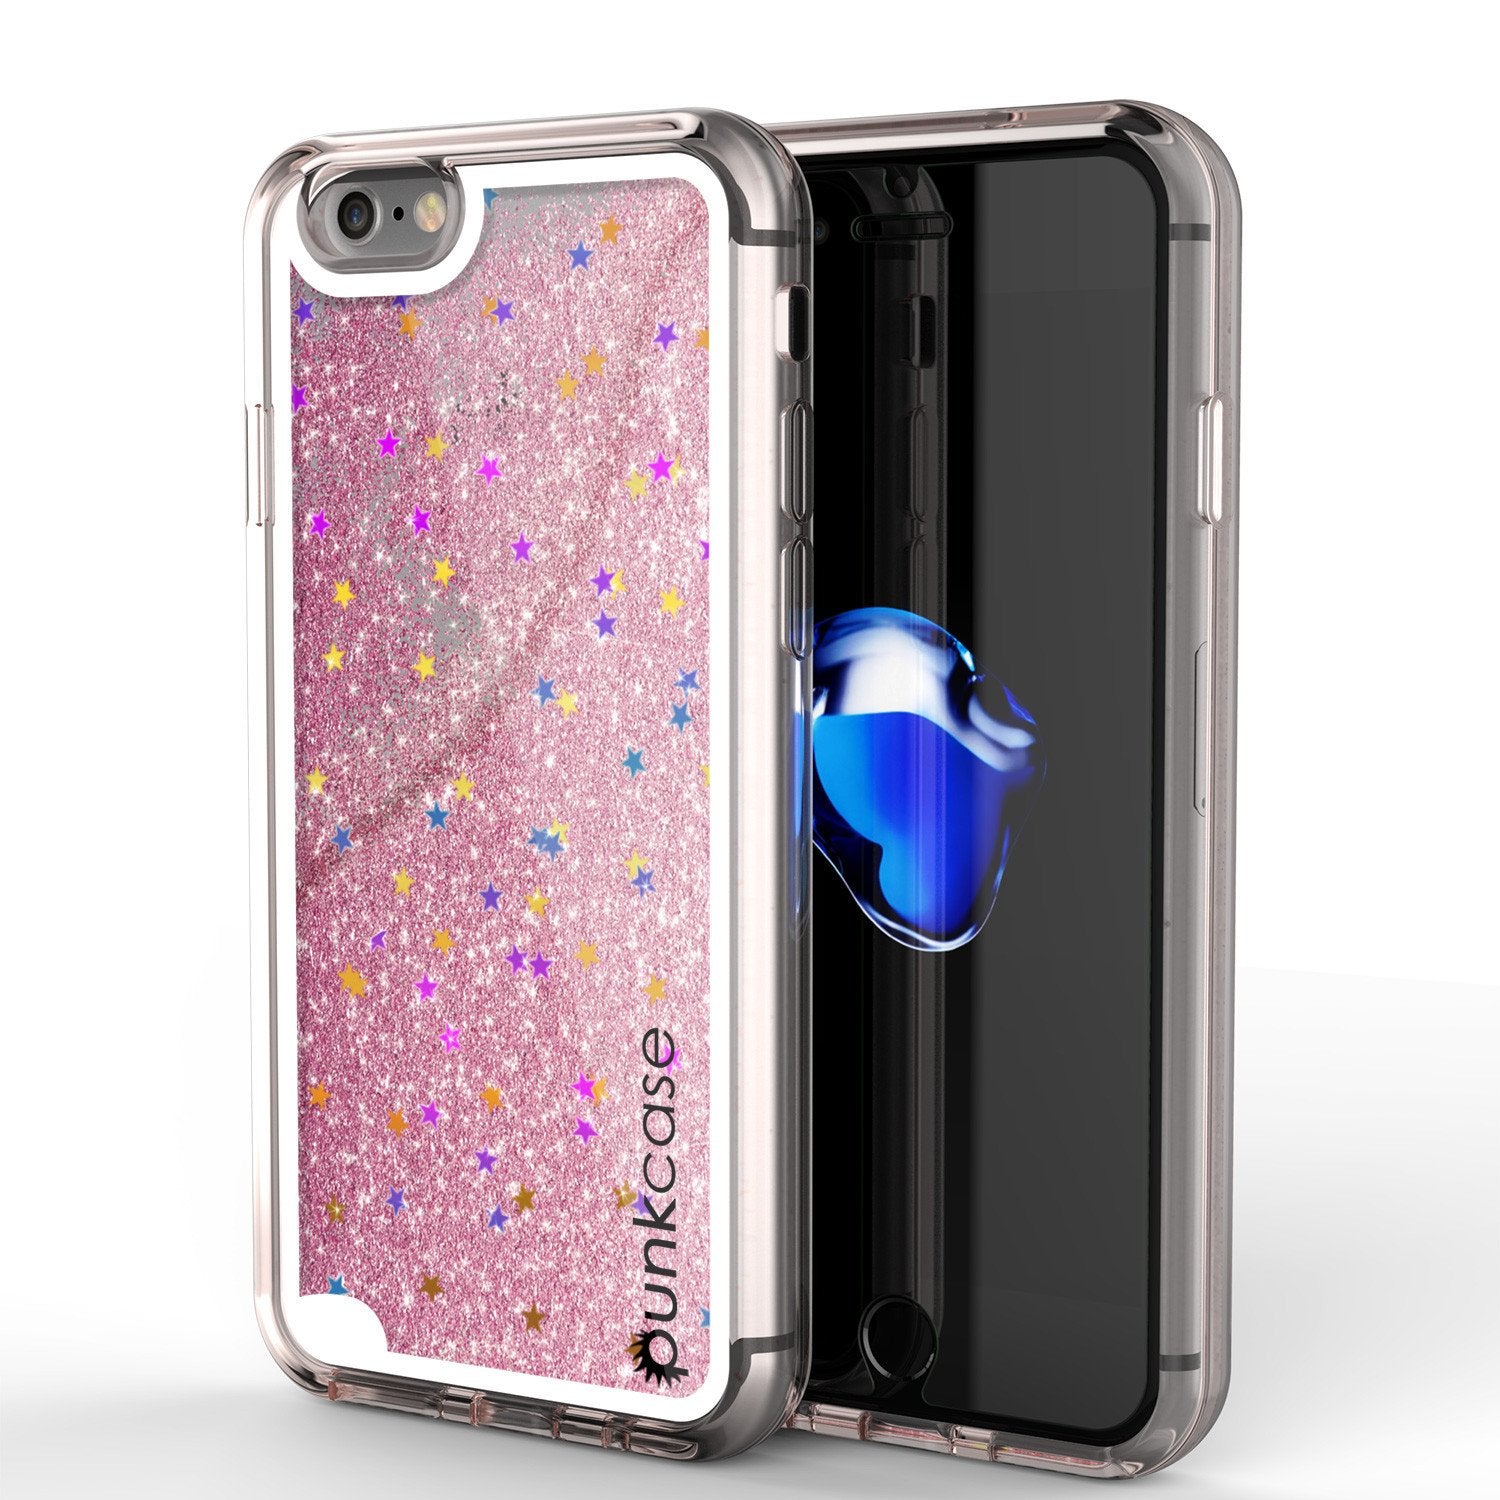 iPhone 7 Case, Punkcase [Liquid Rose Series] Protective Dual Layer Floating Glitter Cover with lots of Bling & Sparkle + 0.3mm Tempered Glass Screen Protector for Apple iPhone 7s